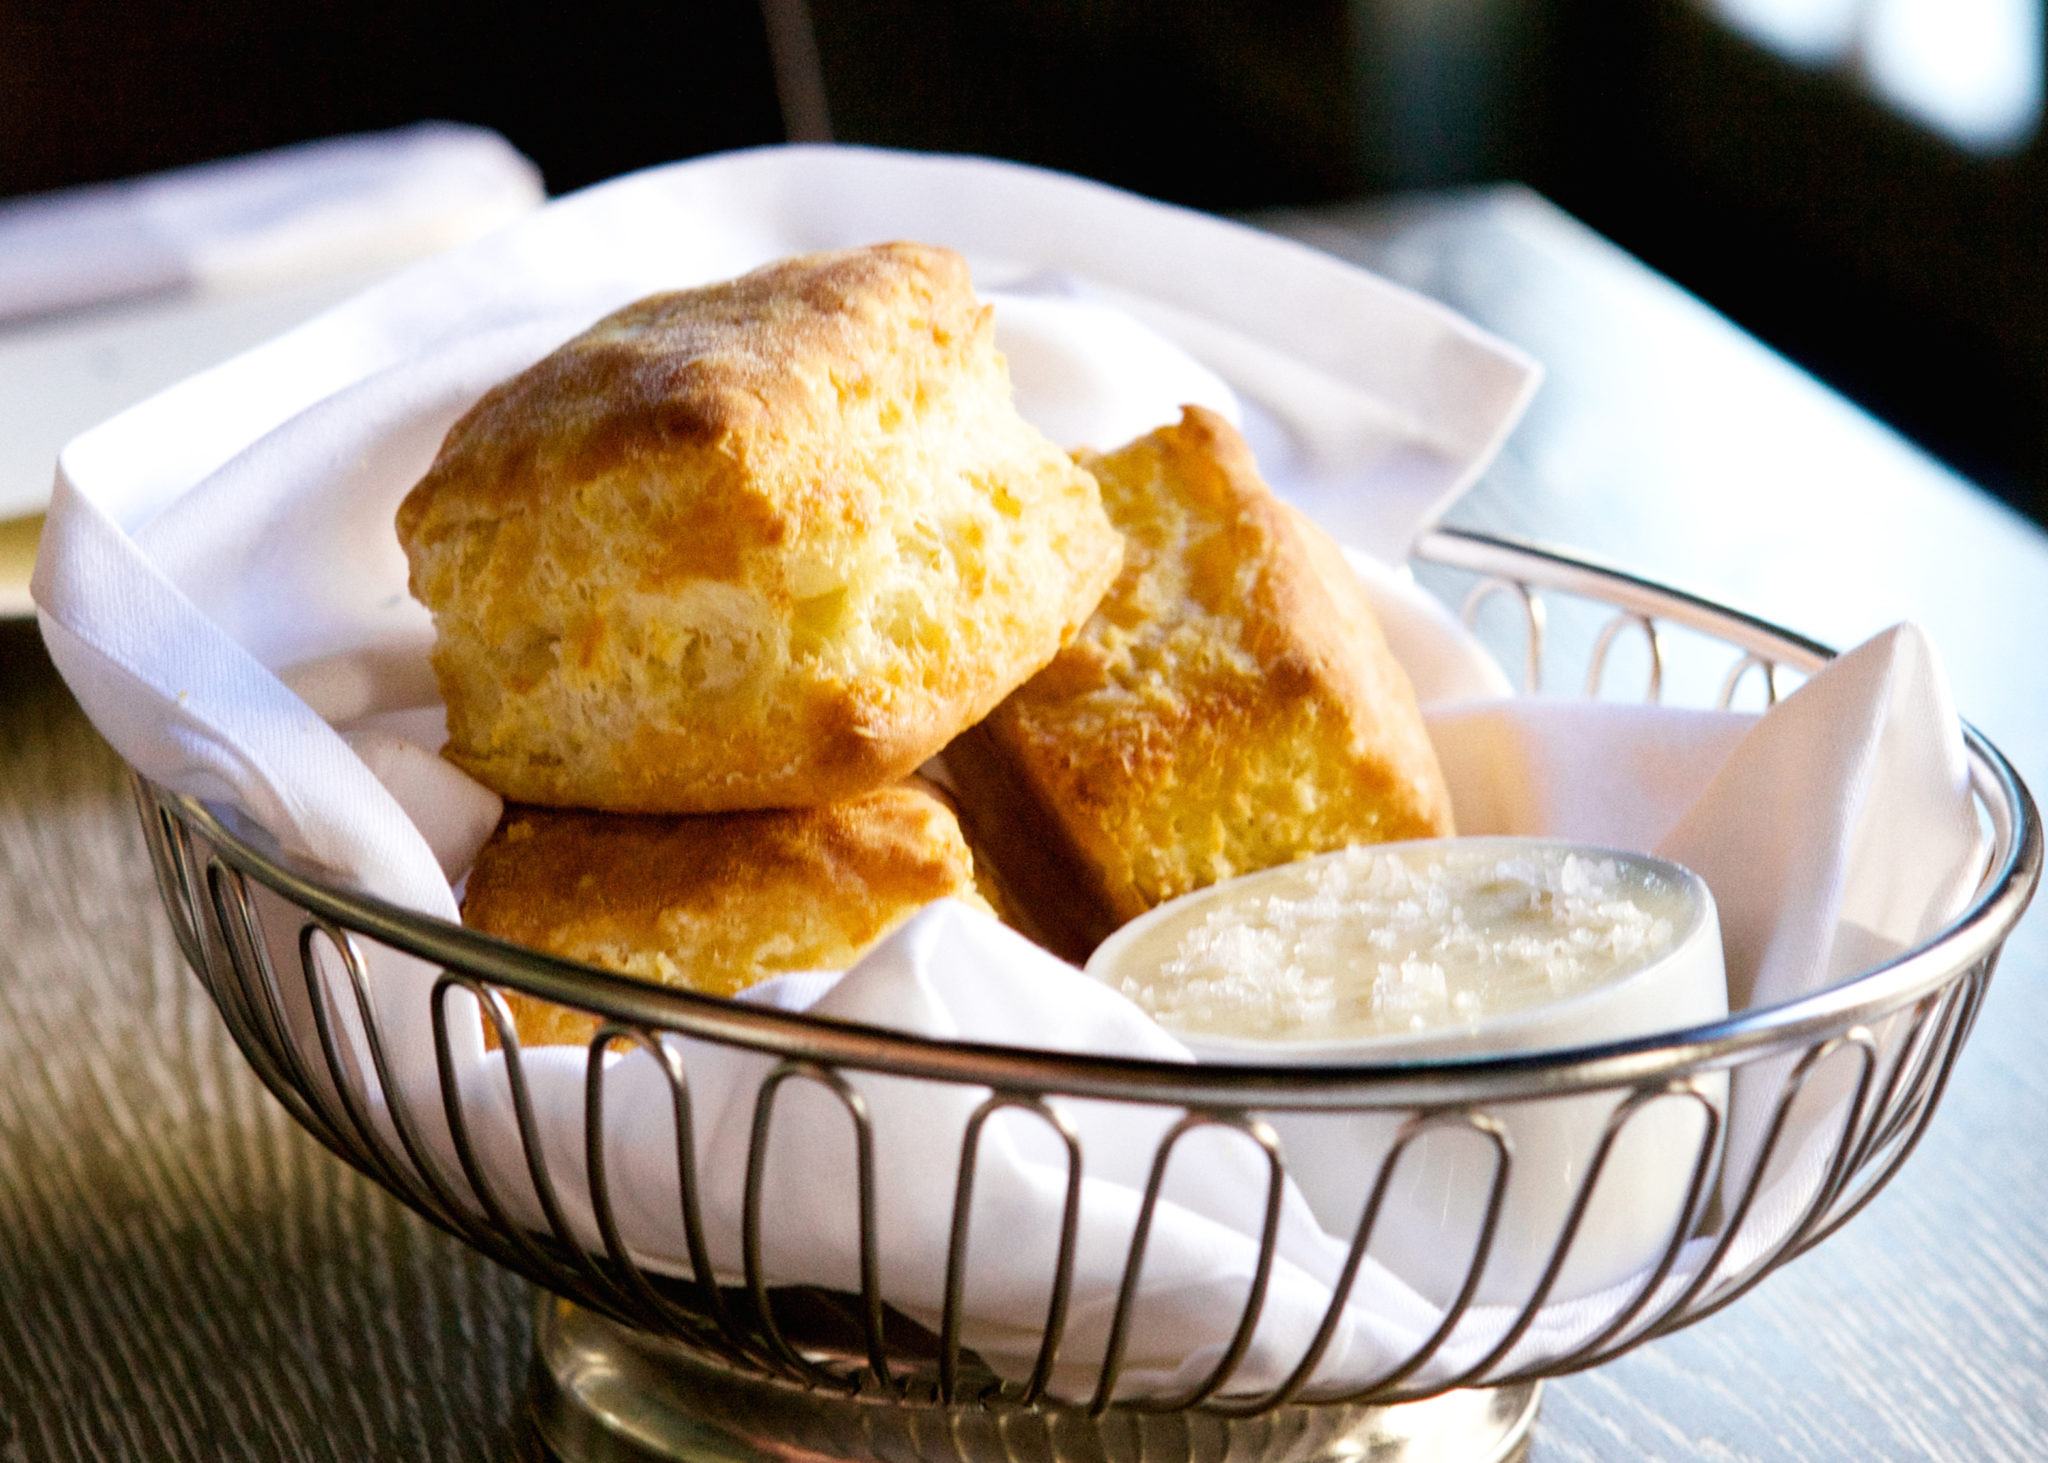 Biscuits and butter